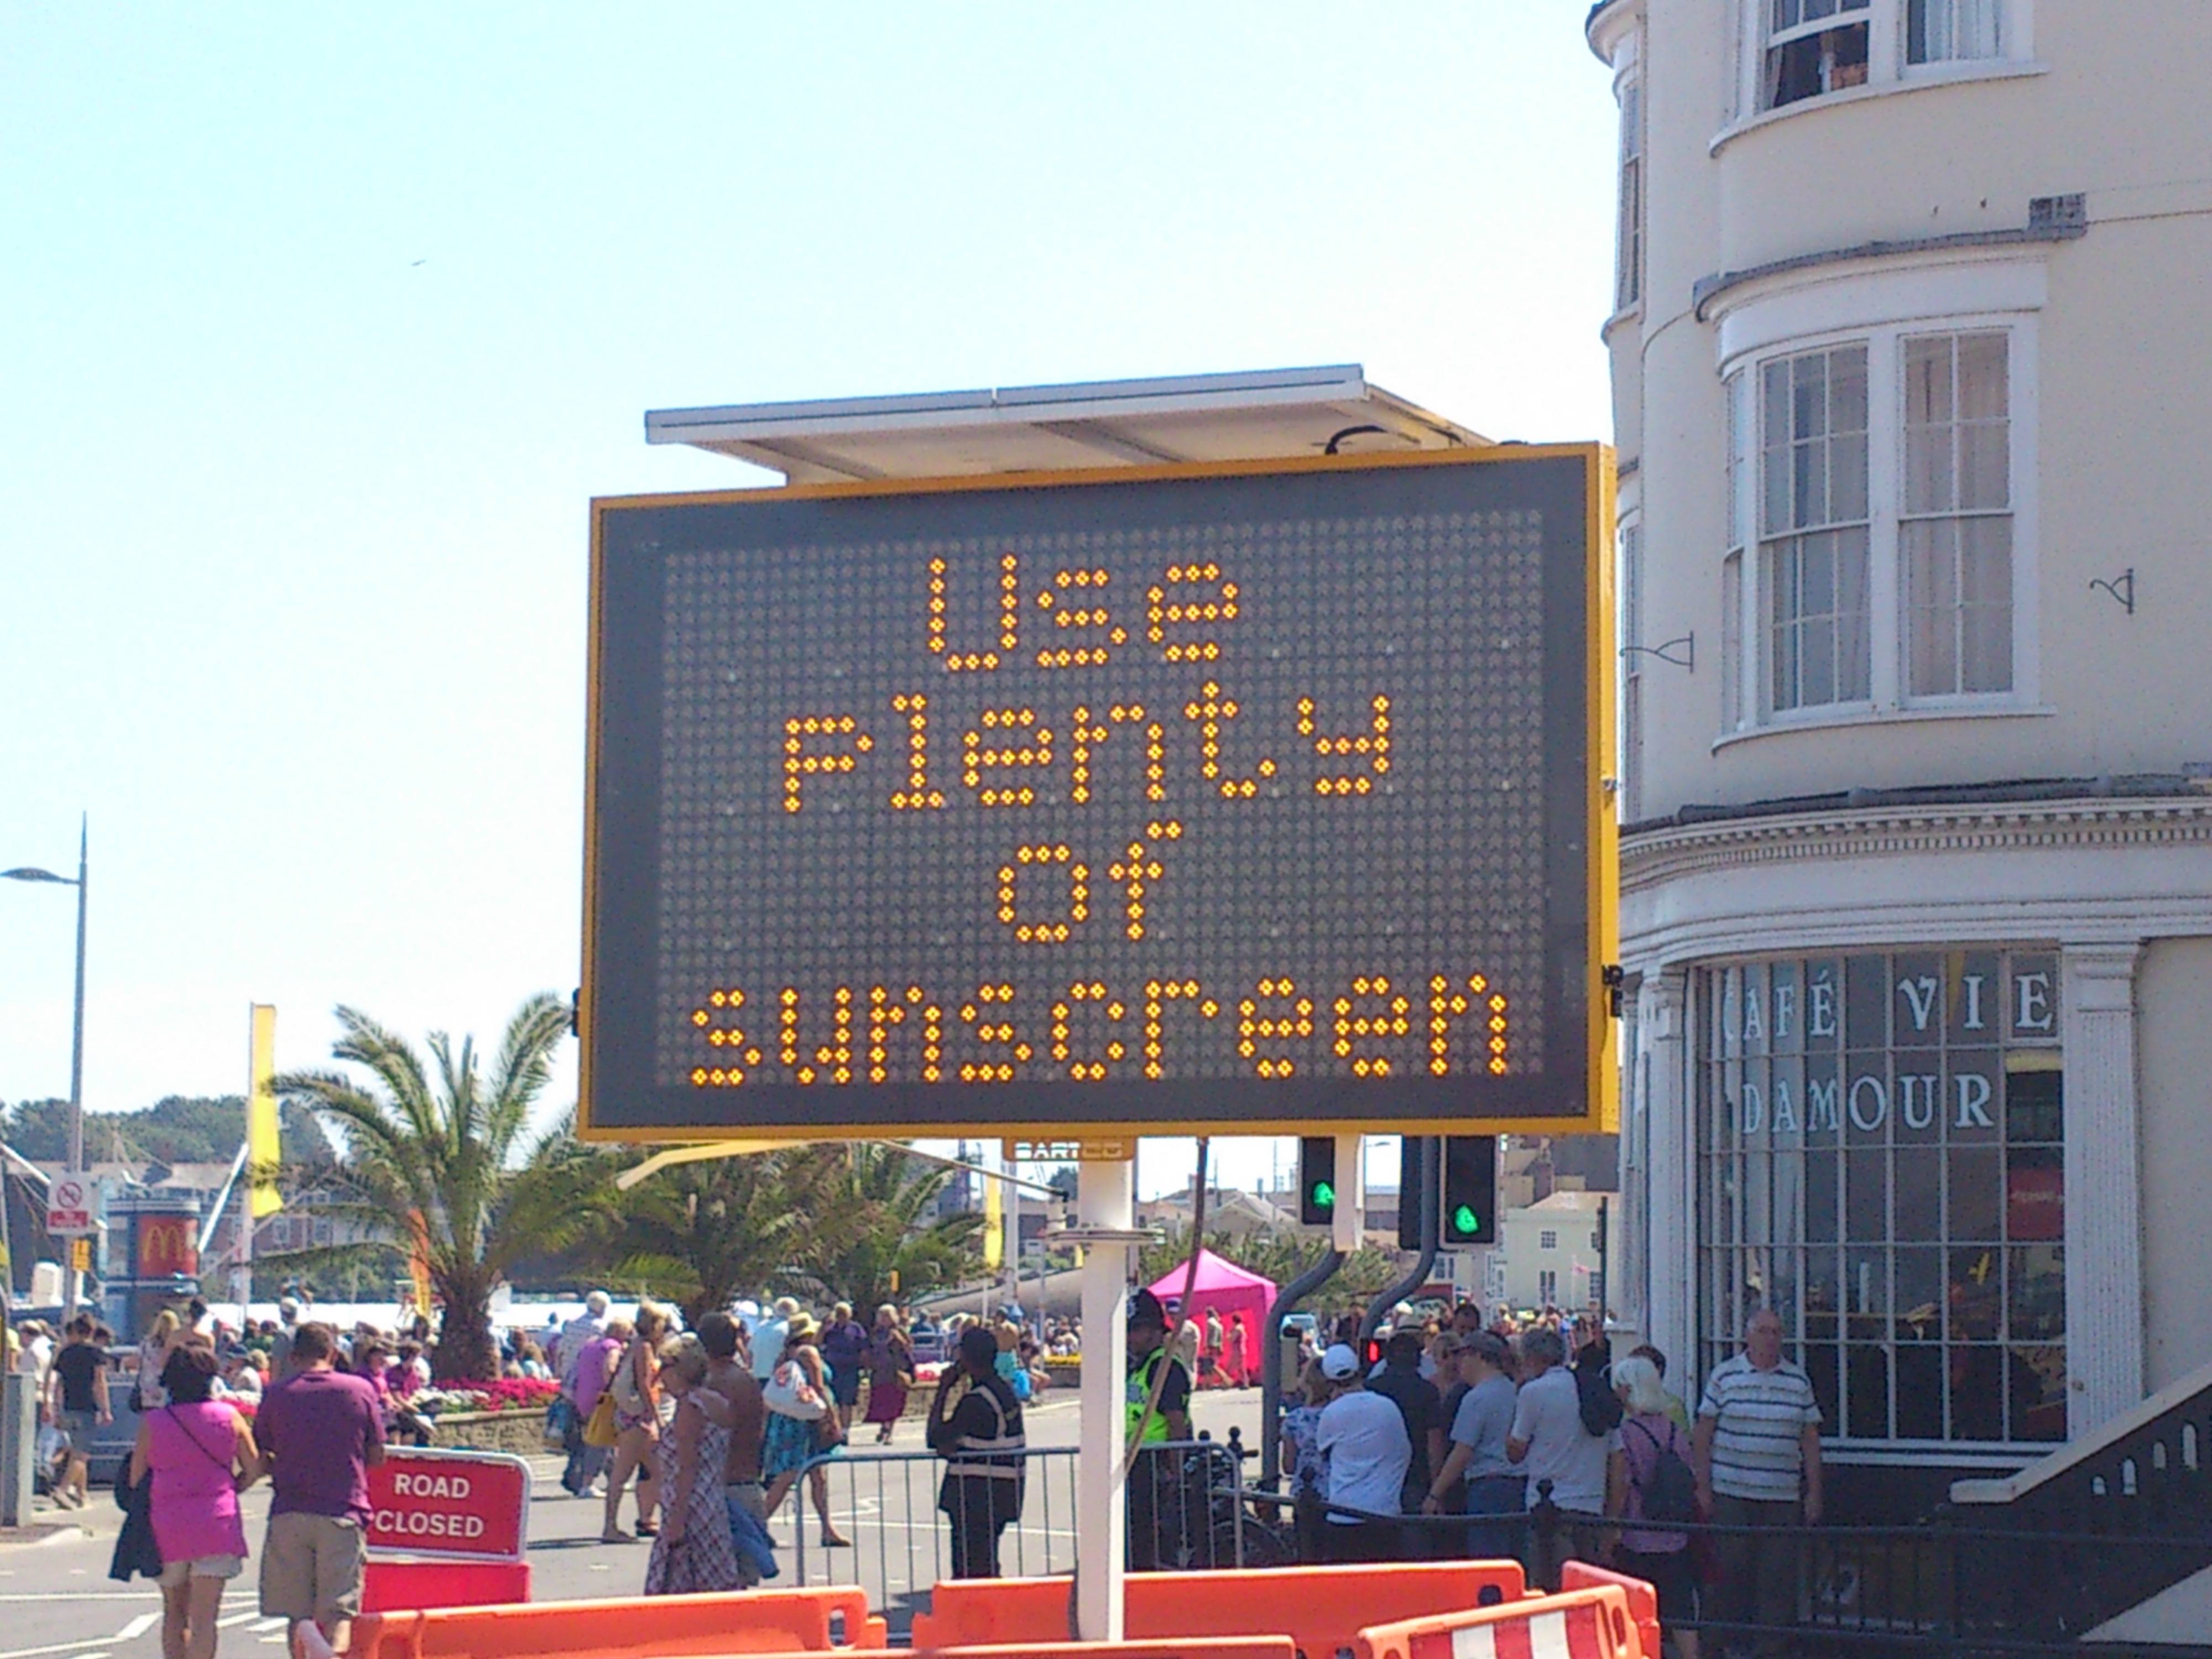 Physical Sunscreens vs. Chemical Sunscreens &#8211; The Argument